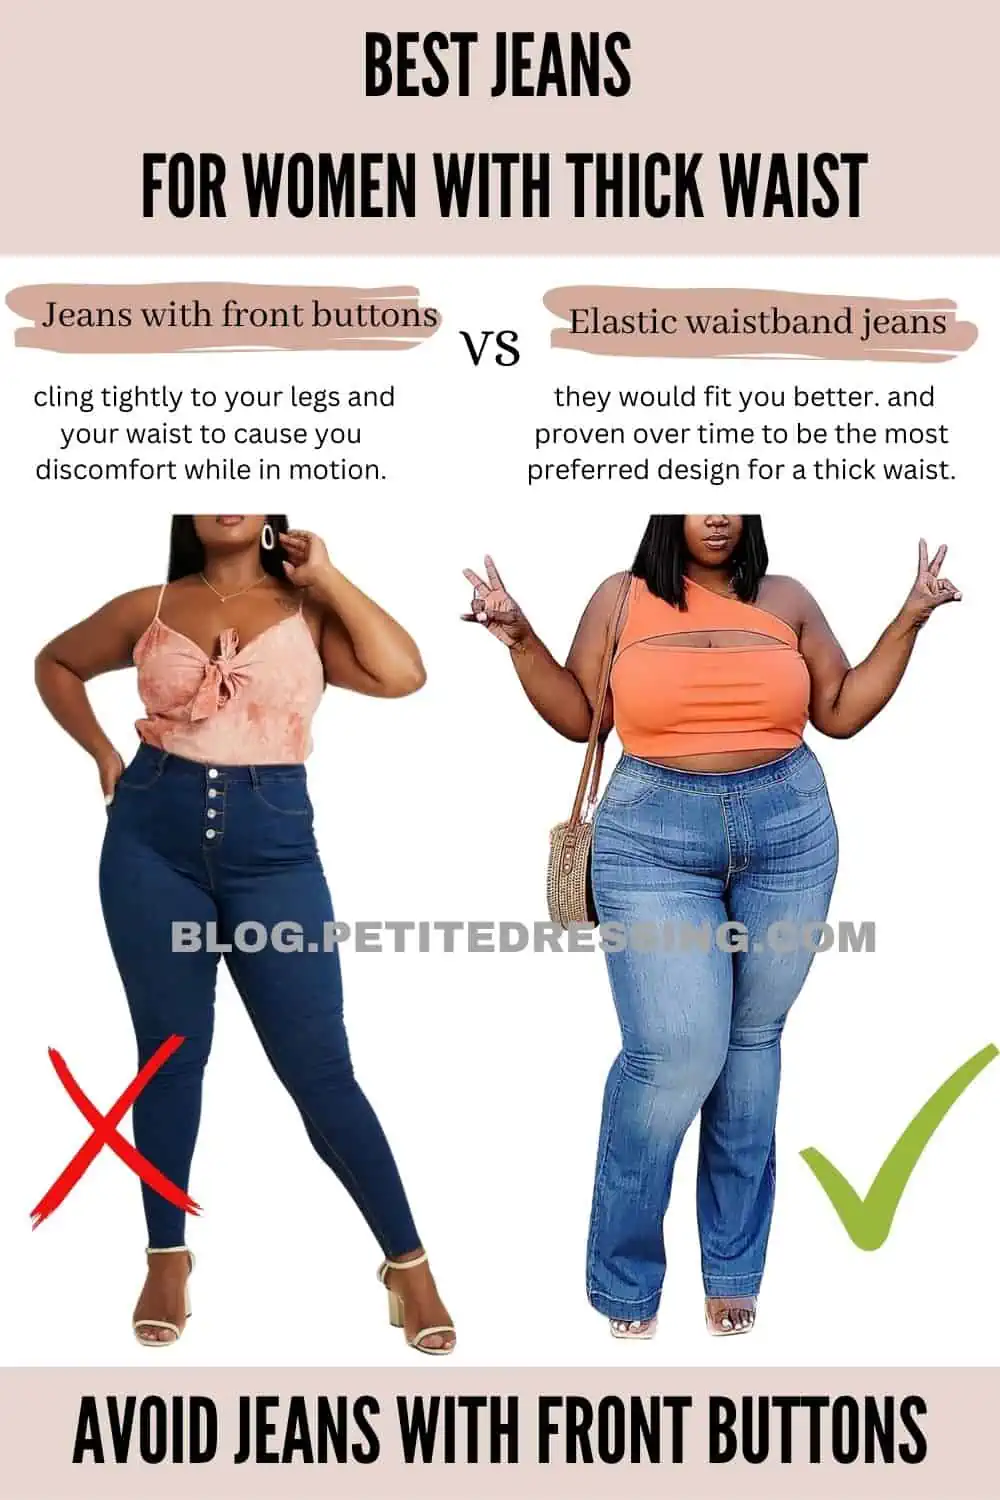 The Comprehensive Jeans Guide for Women with a Thick Waist - Petite Dressing